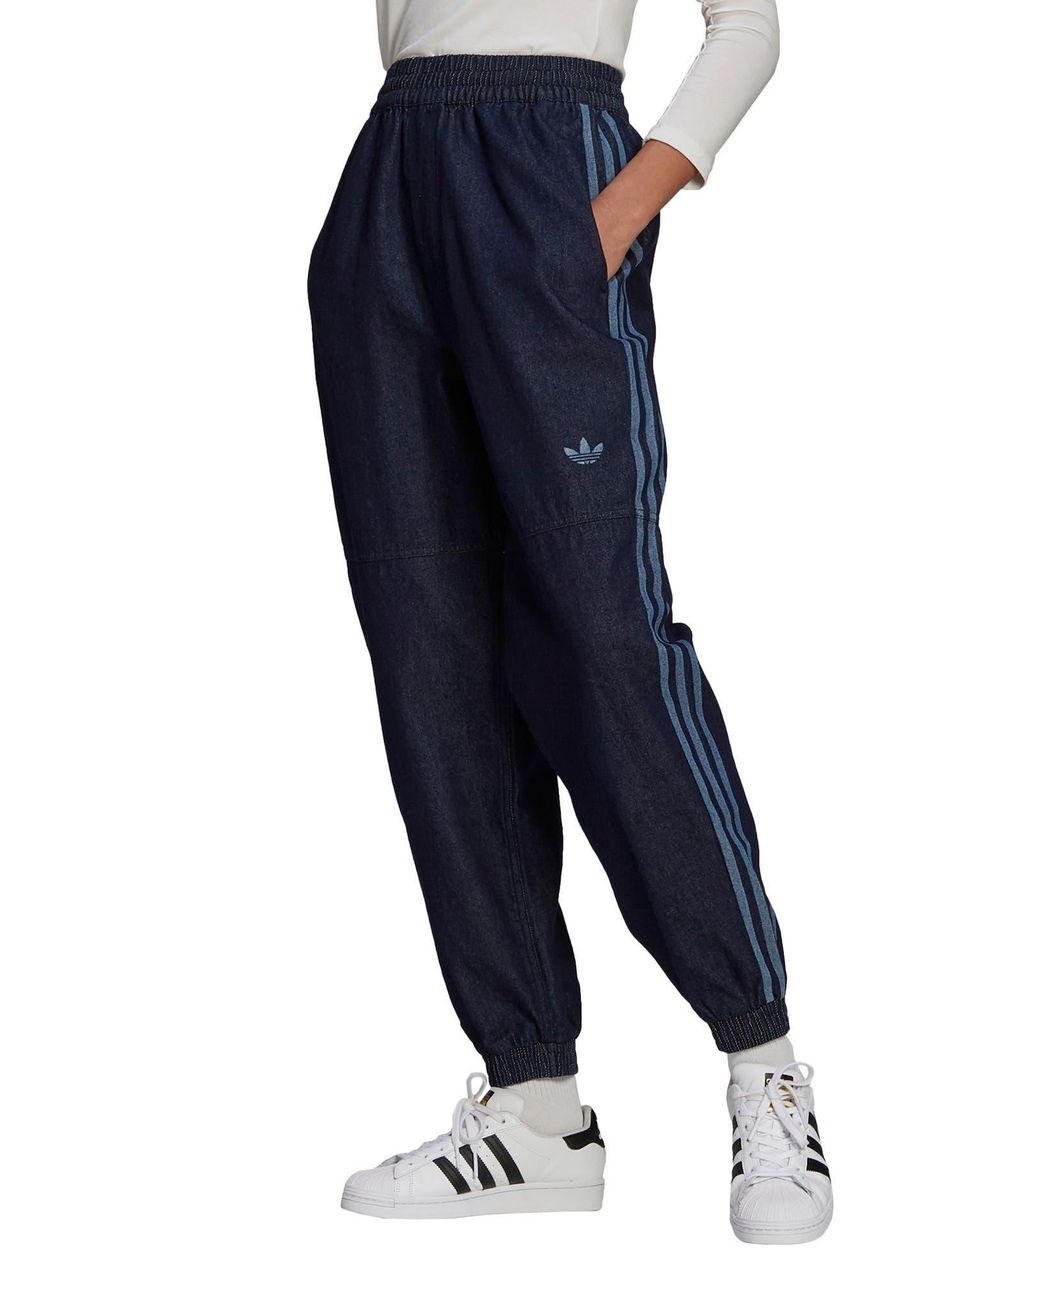 Buy Denim Track Pants for Men by Campus Sutra Online | Ajio.com